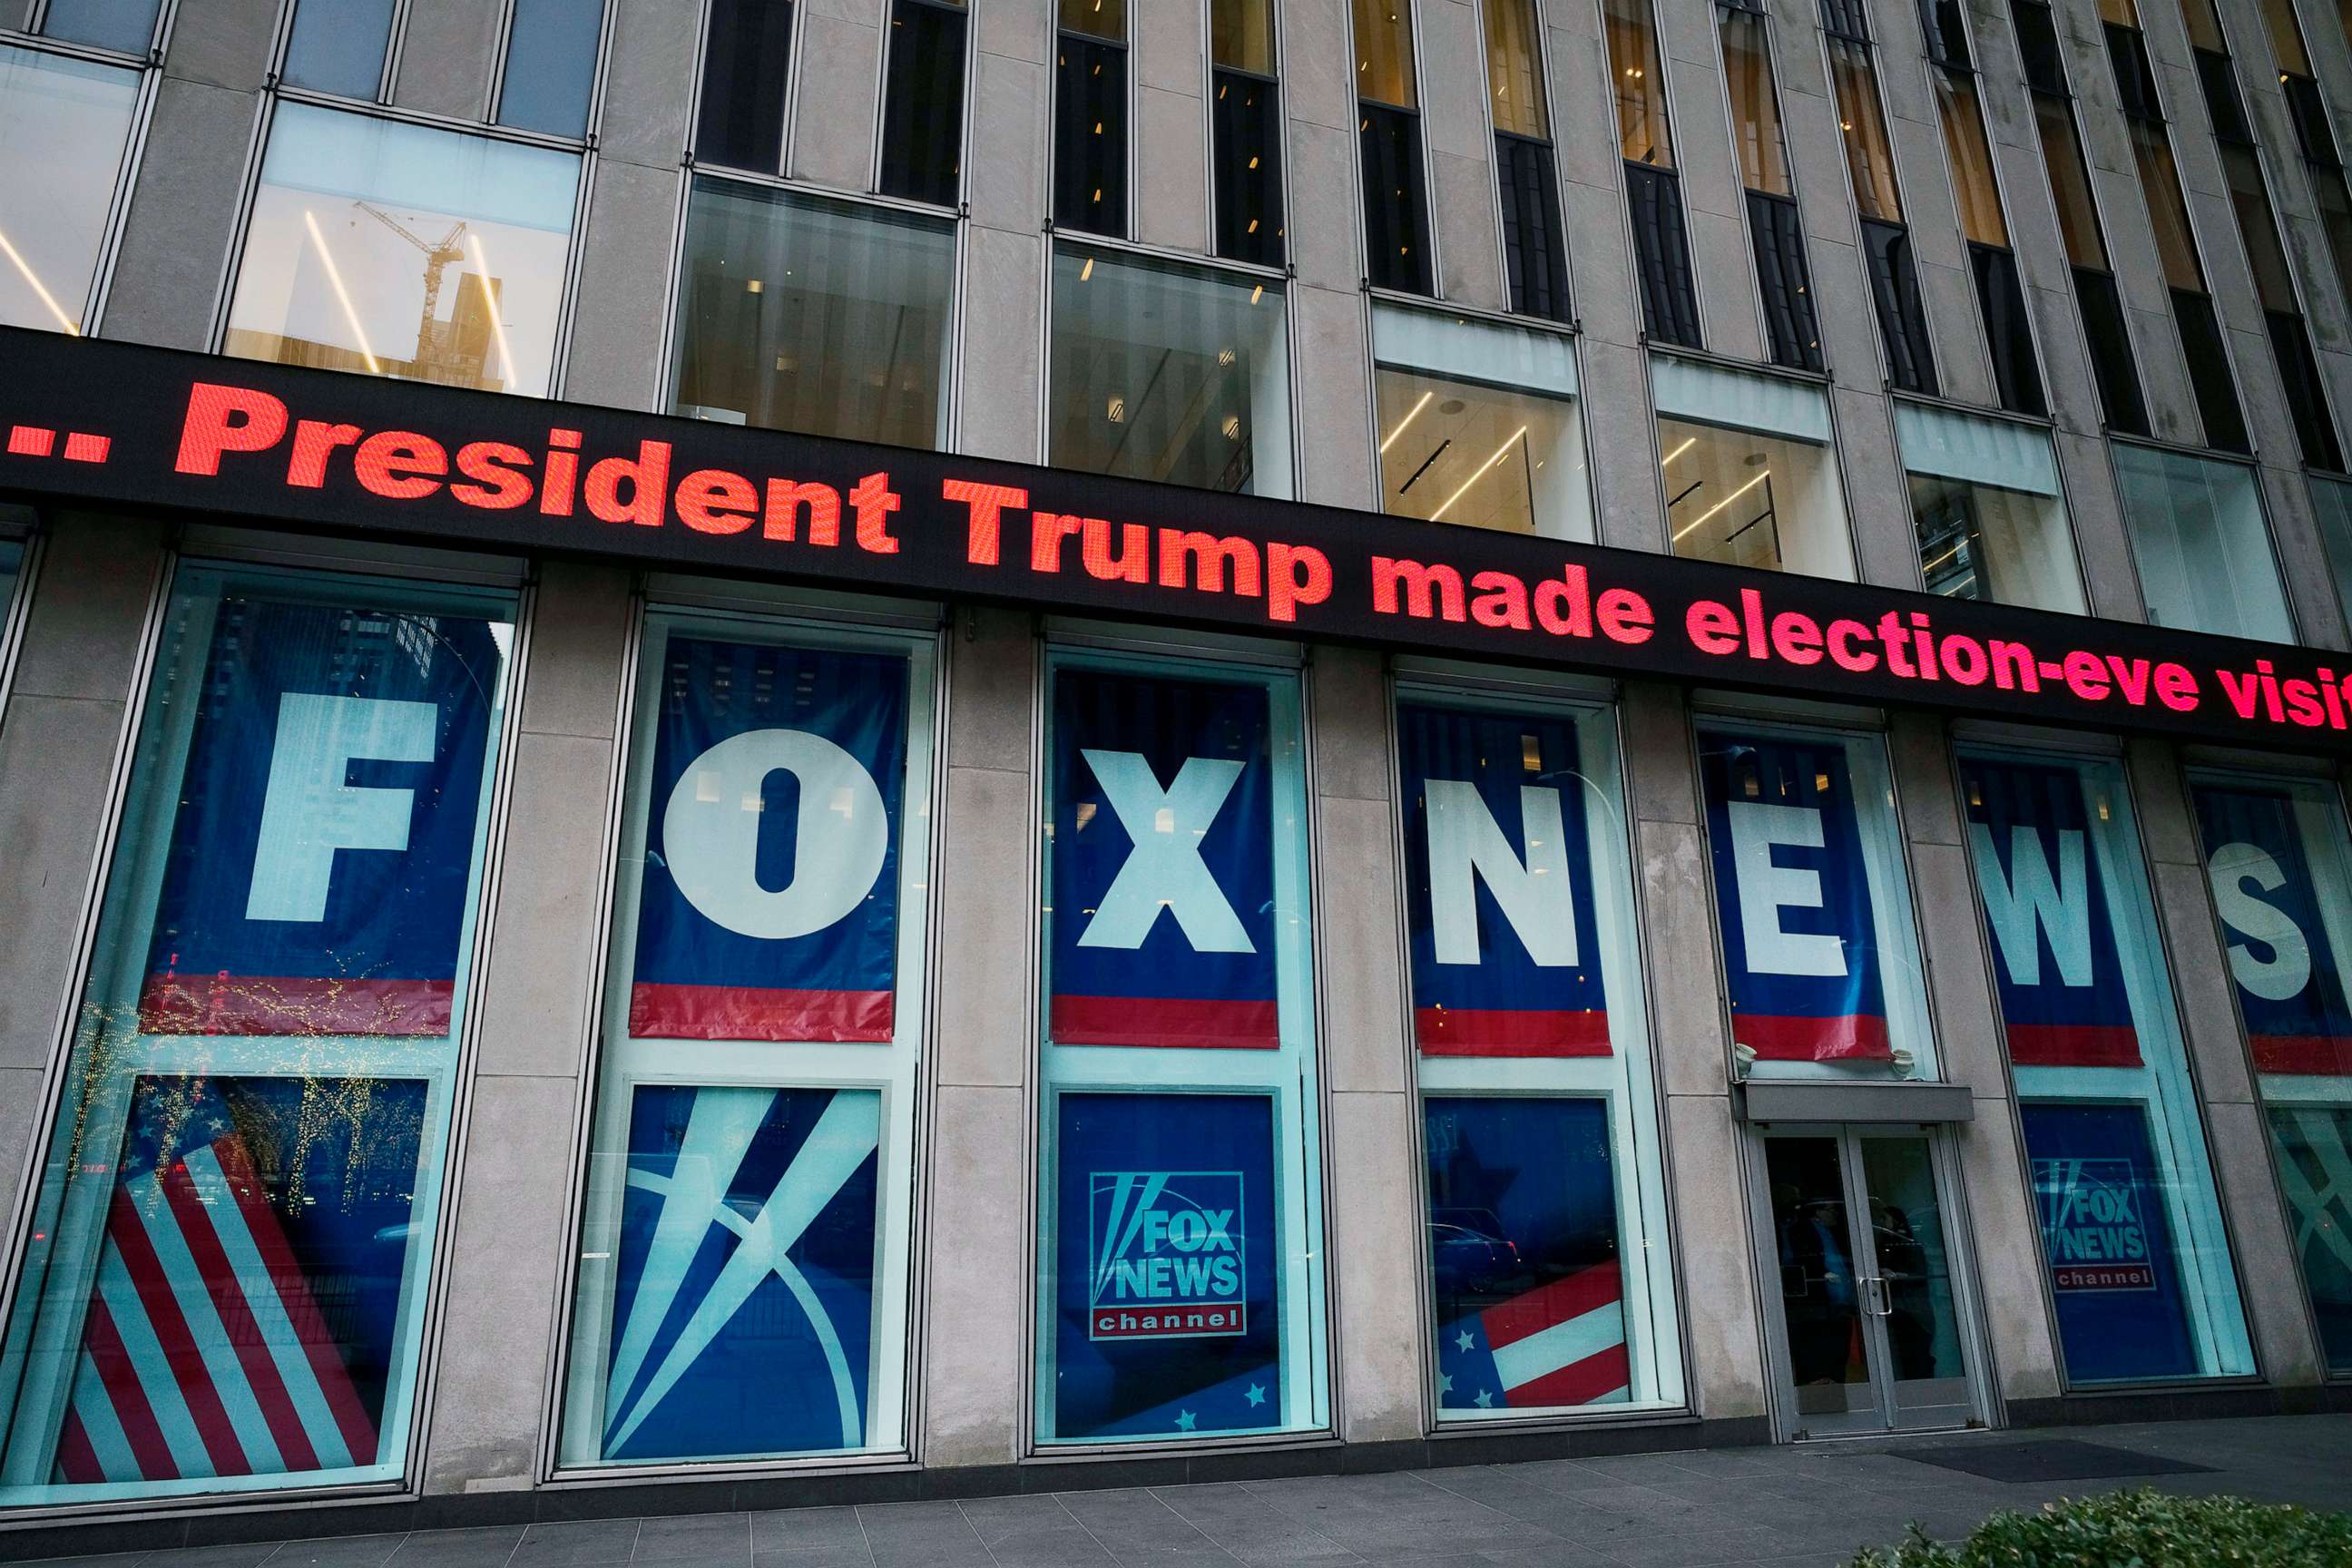 PHOTO: In this Nov. 28, 2018 file photo a headline about President Donald Trump is shown outside Fox News studios in New York.